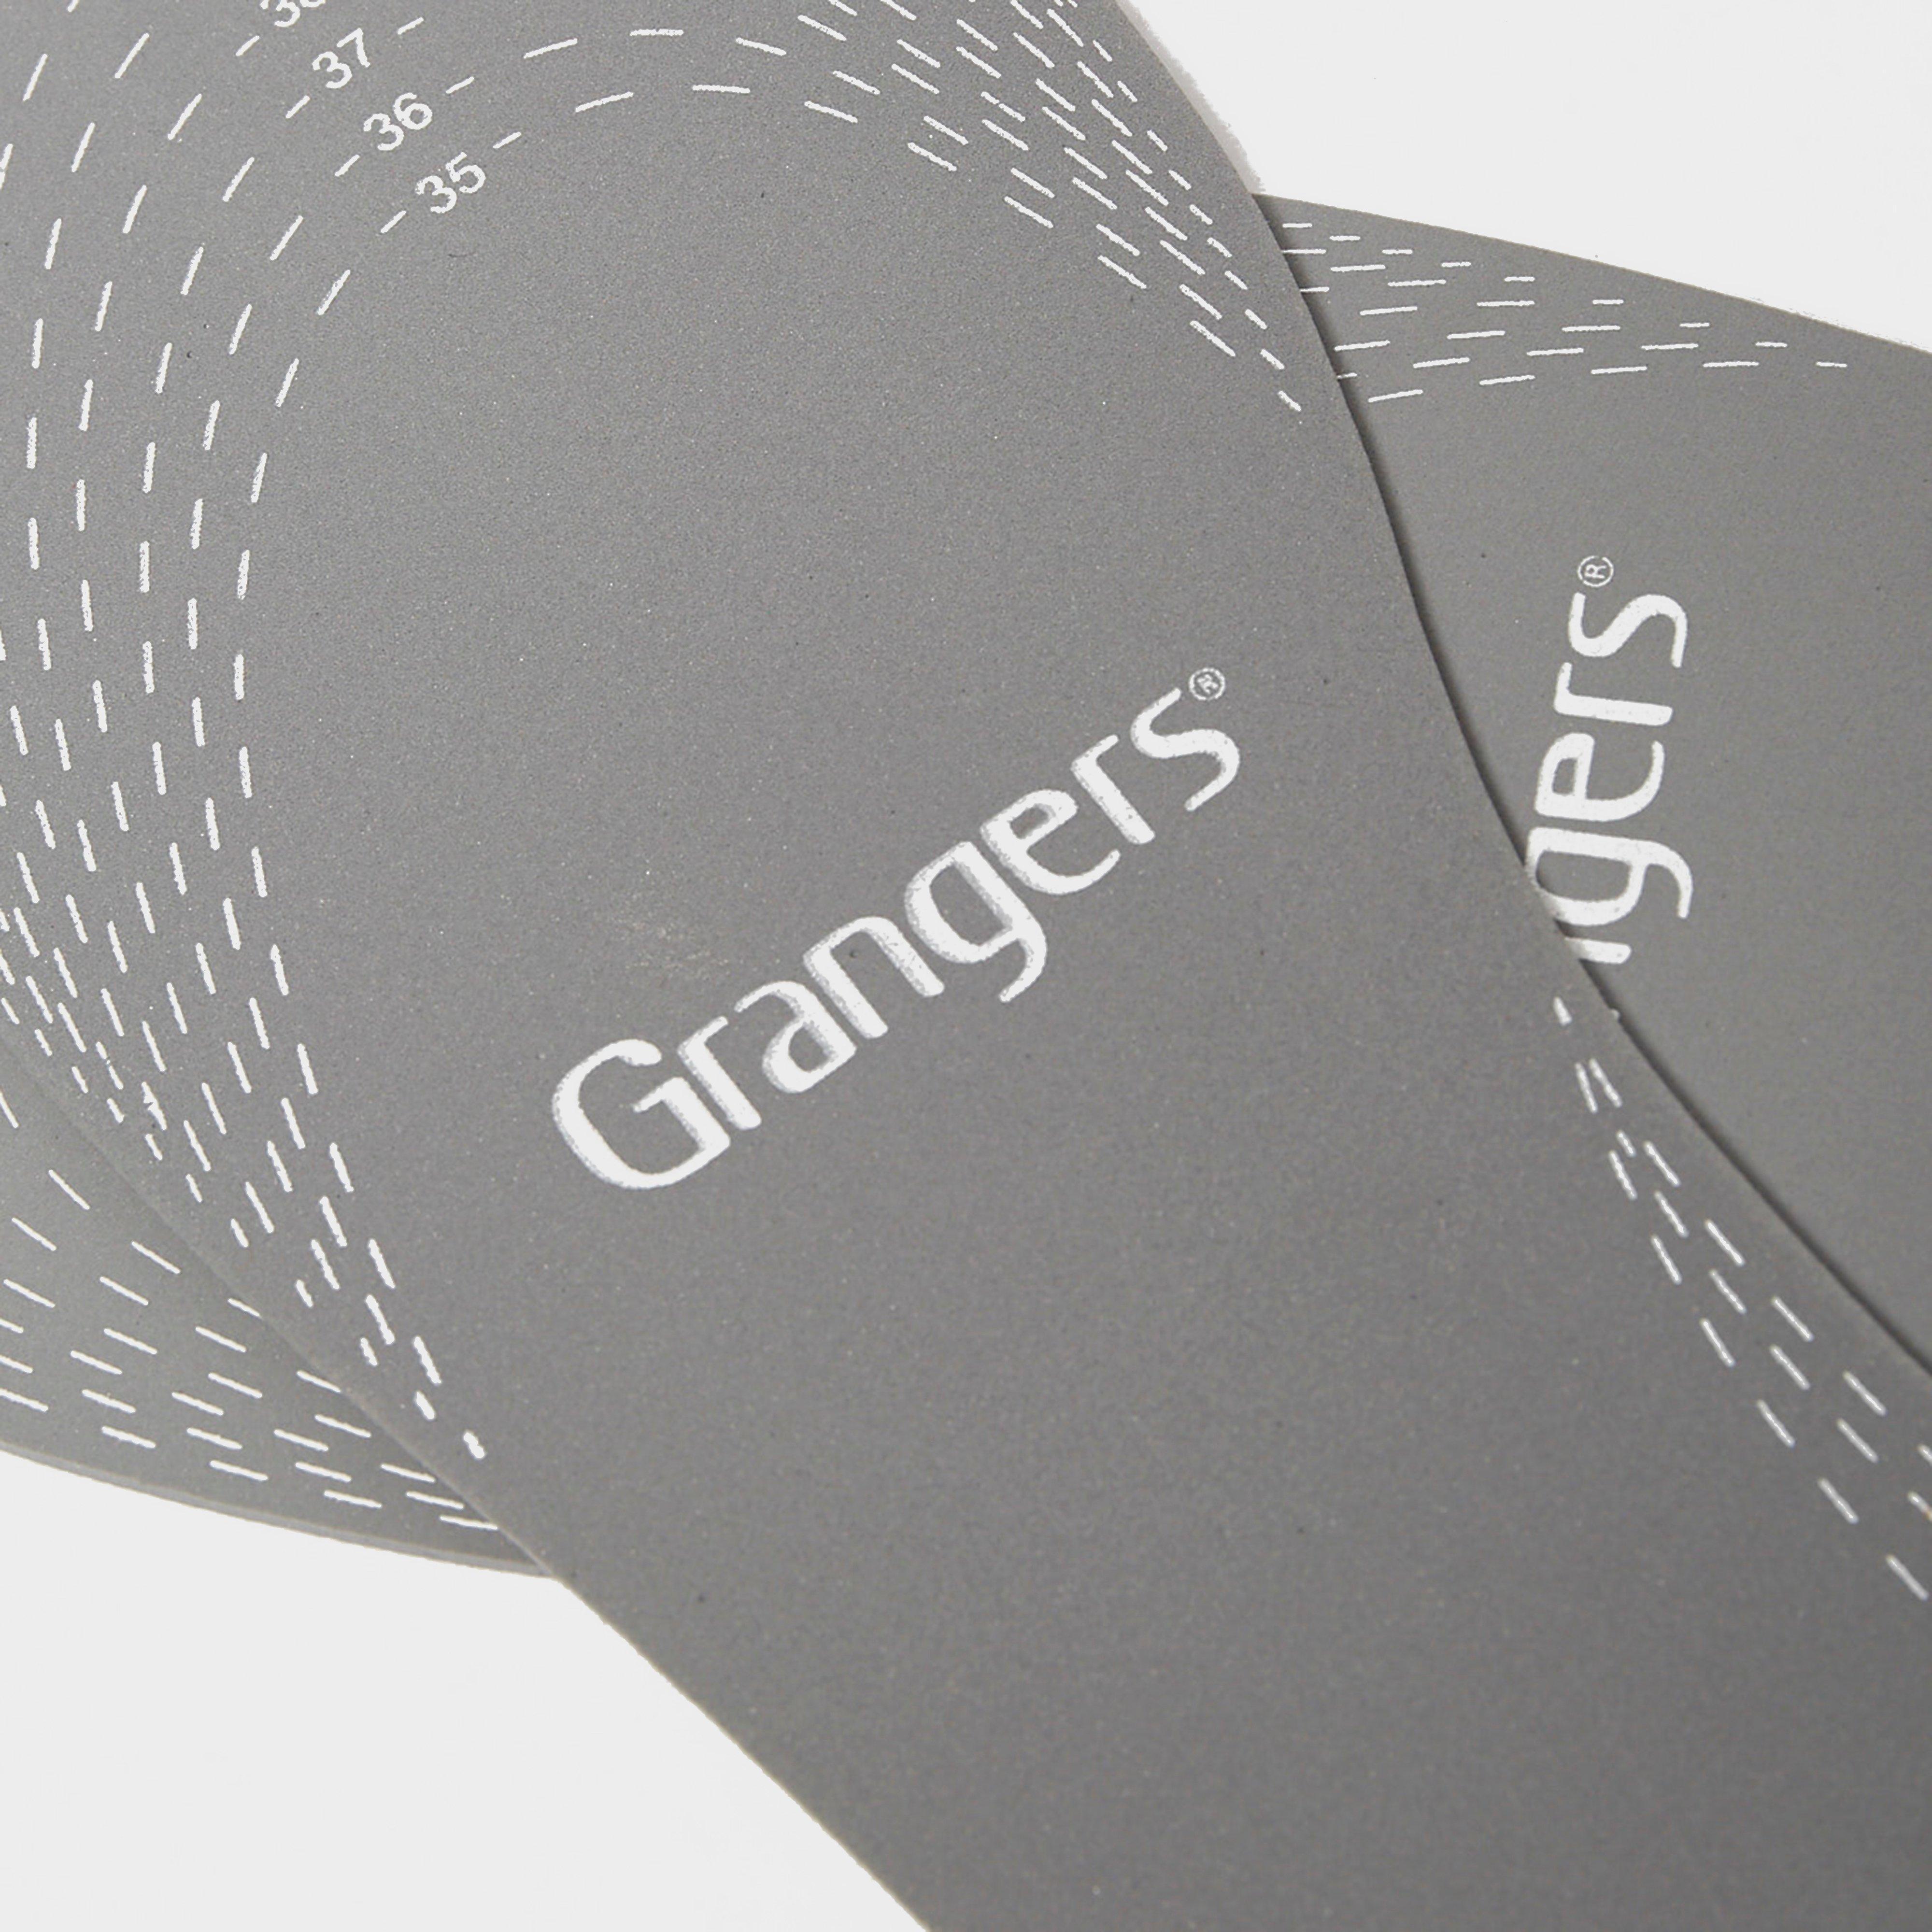 Grangers 3MM Adjustable Insoles Review